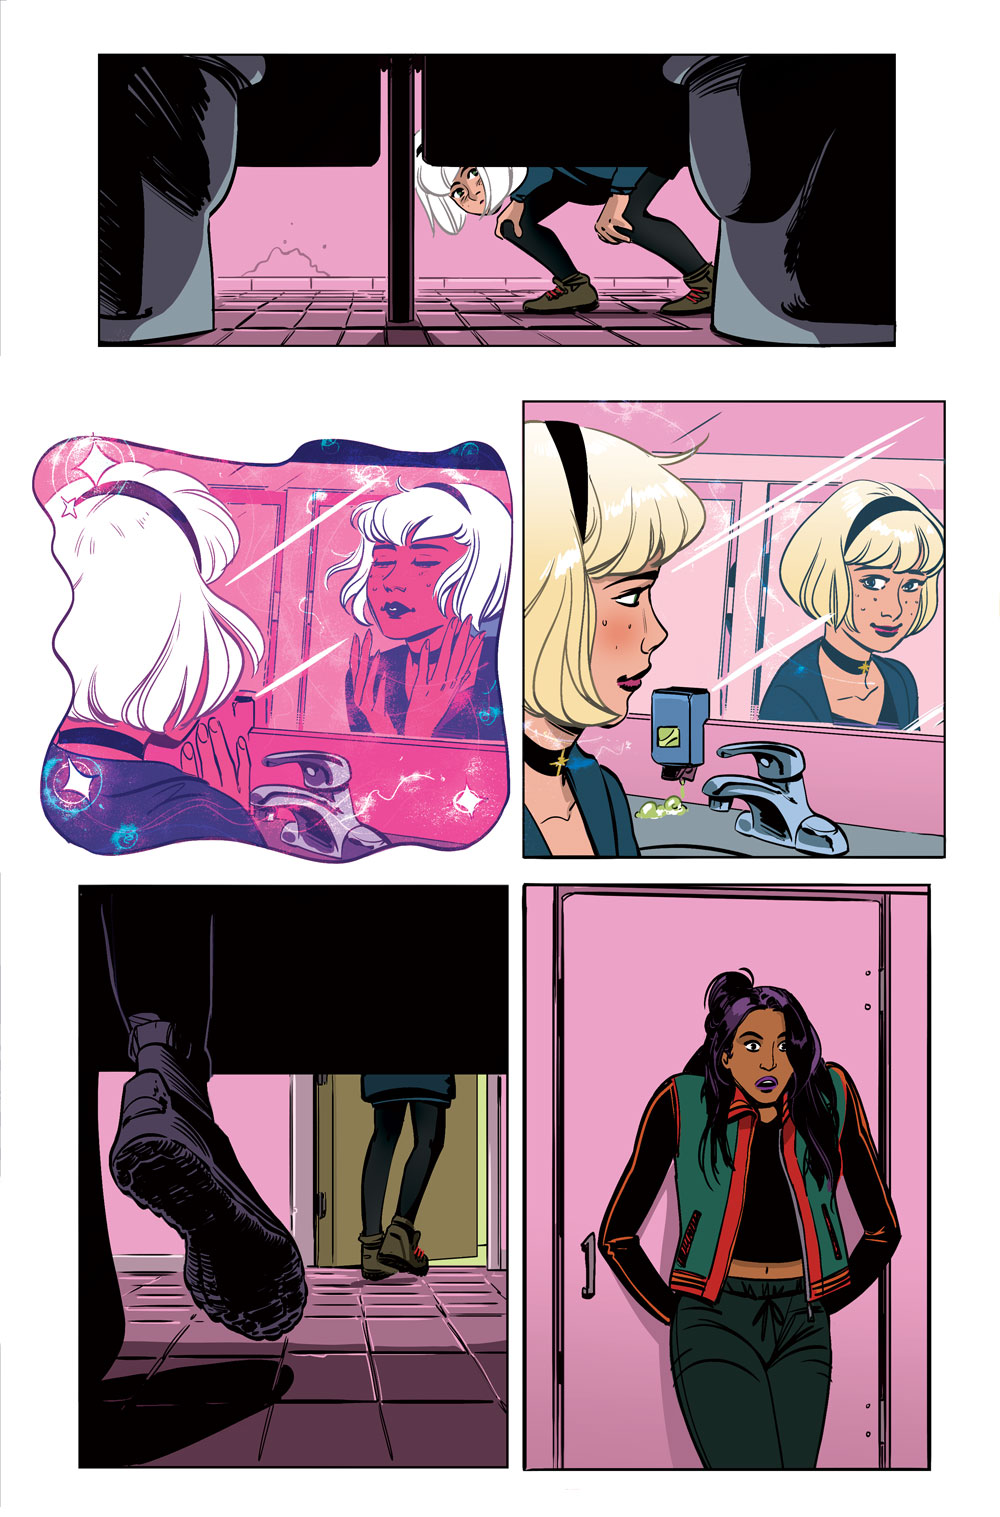 Sabrina the Teenage Witch #4 preview page 3